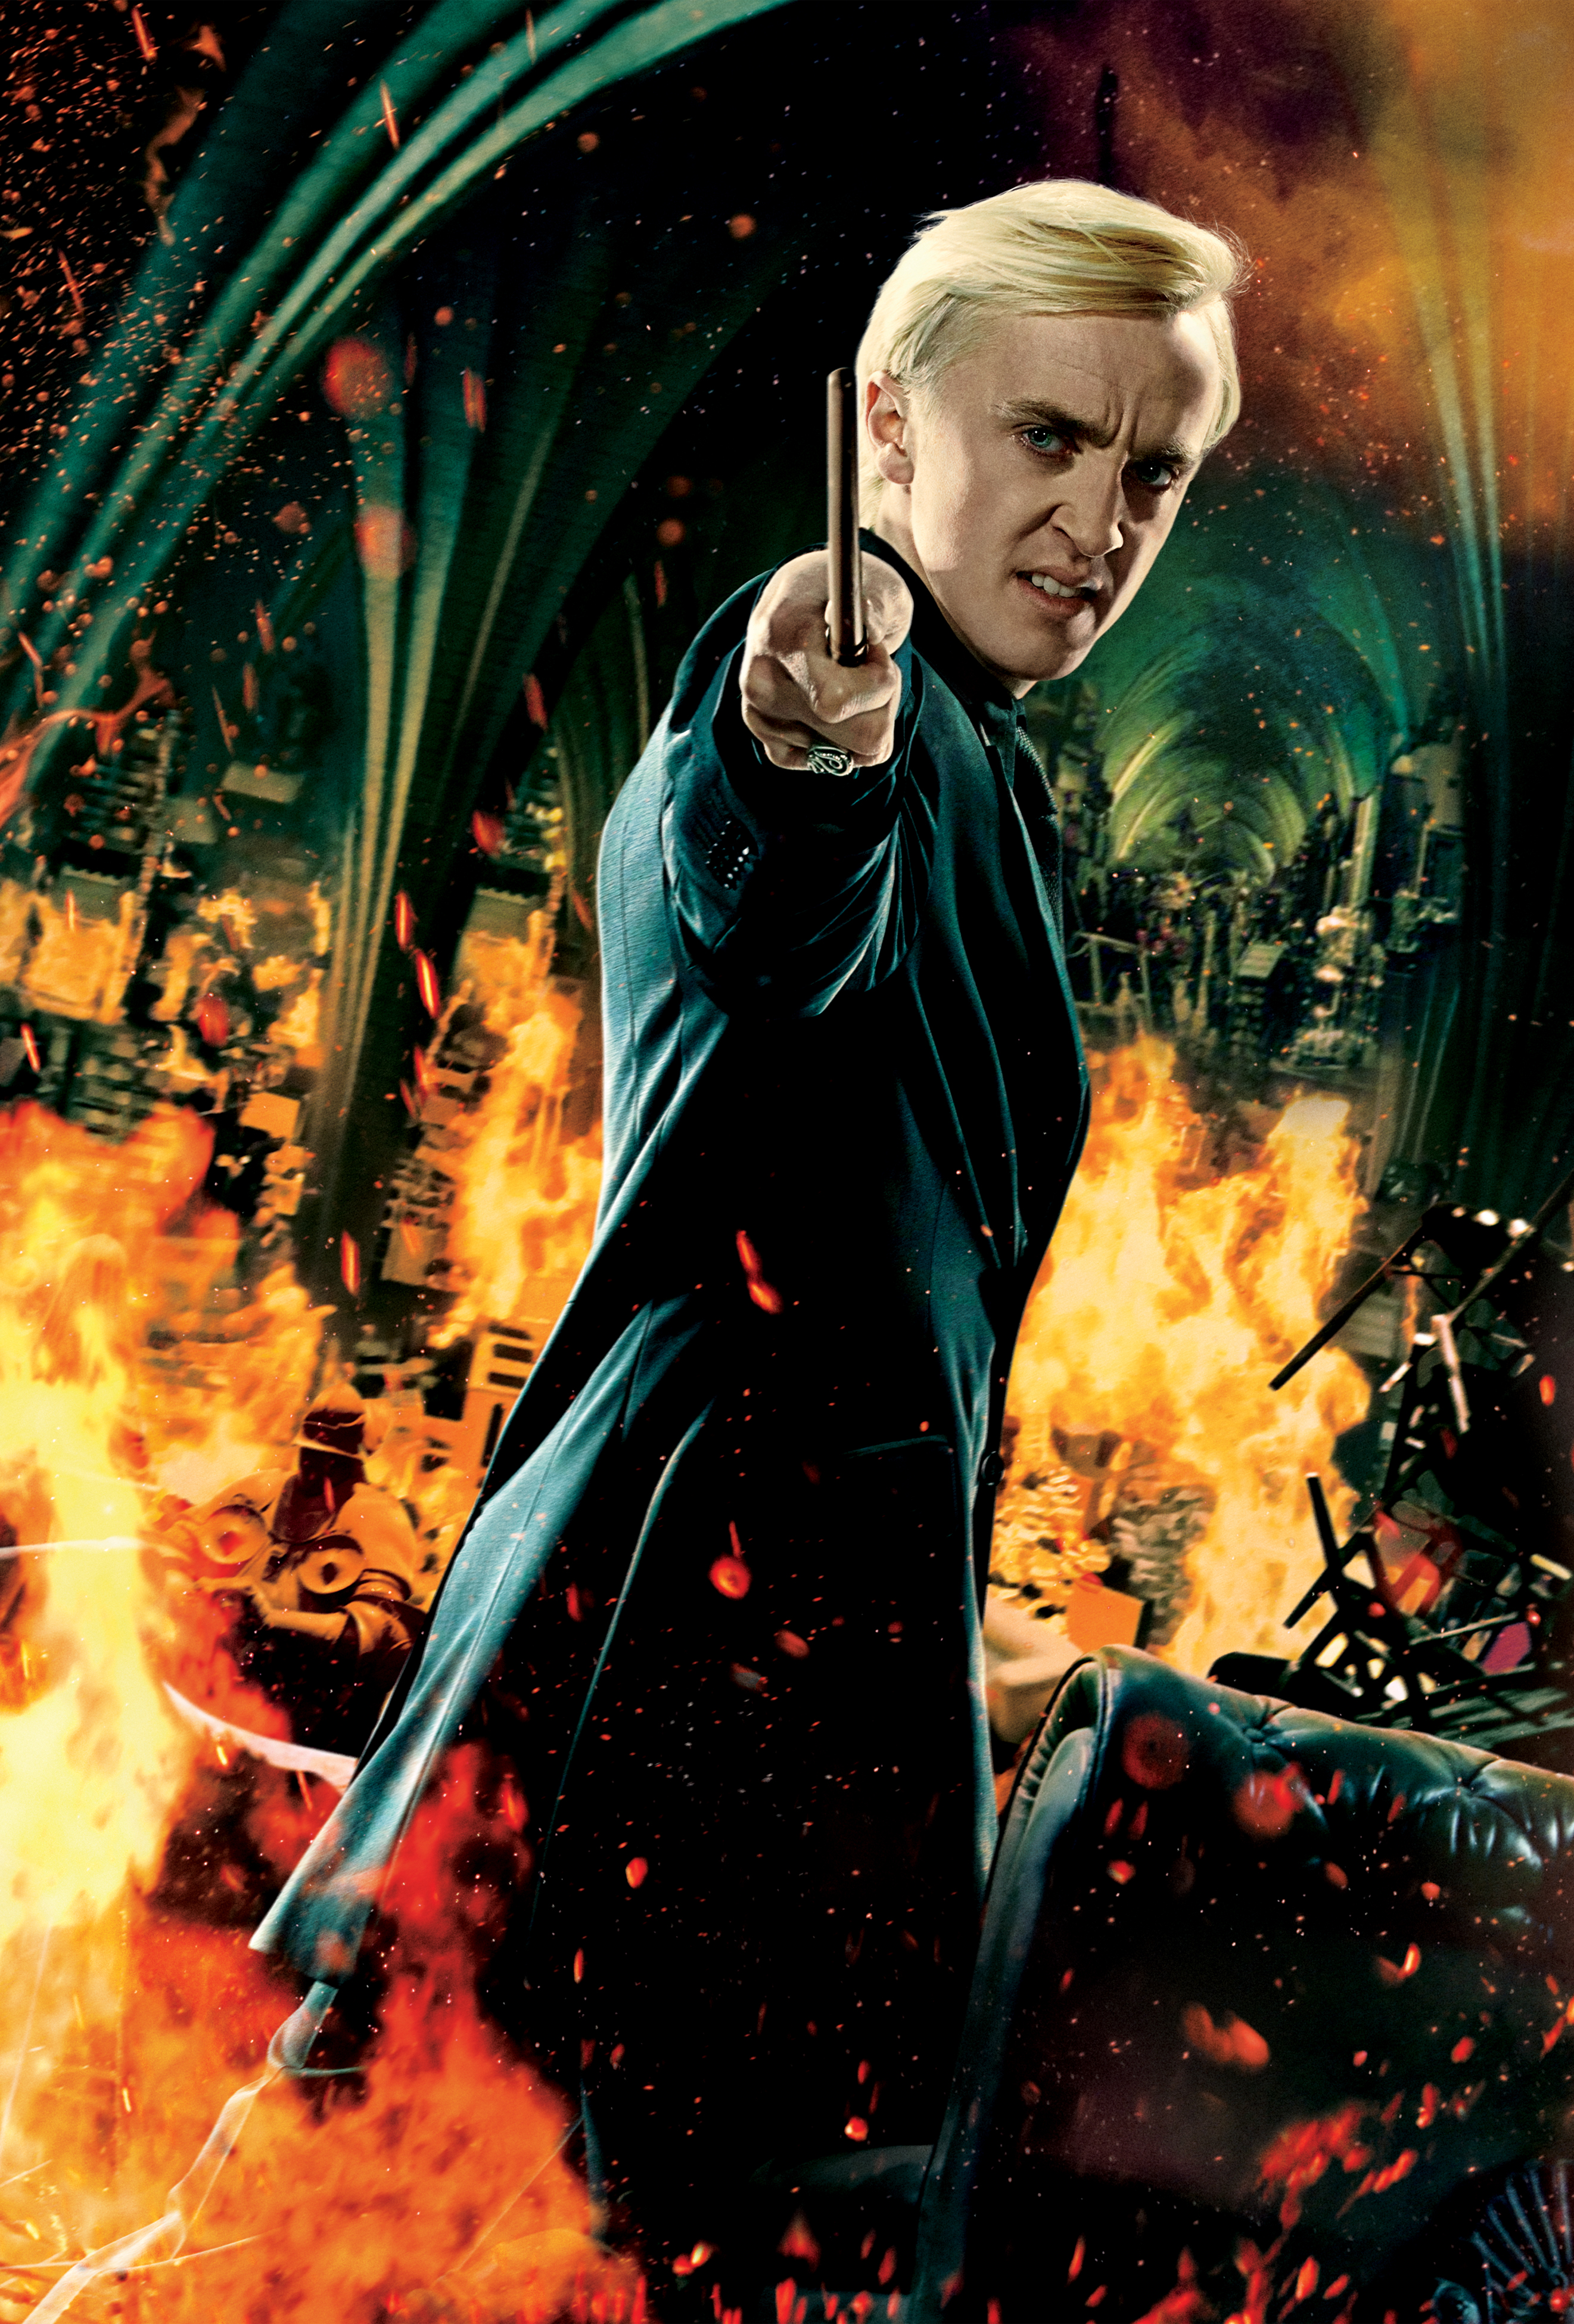 Harry Potter, wand, Harry Potter and the Deathly Hallows, Tom Felton, Draco Malfoy - desktop wallpaper